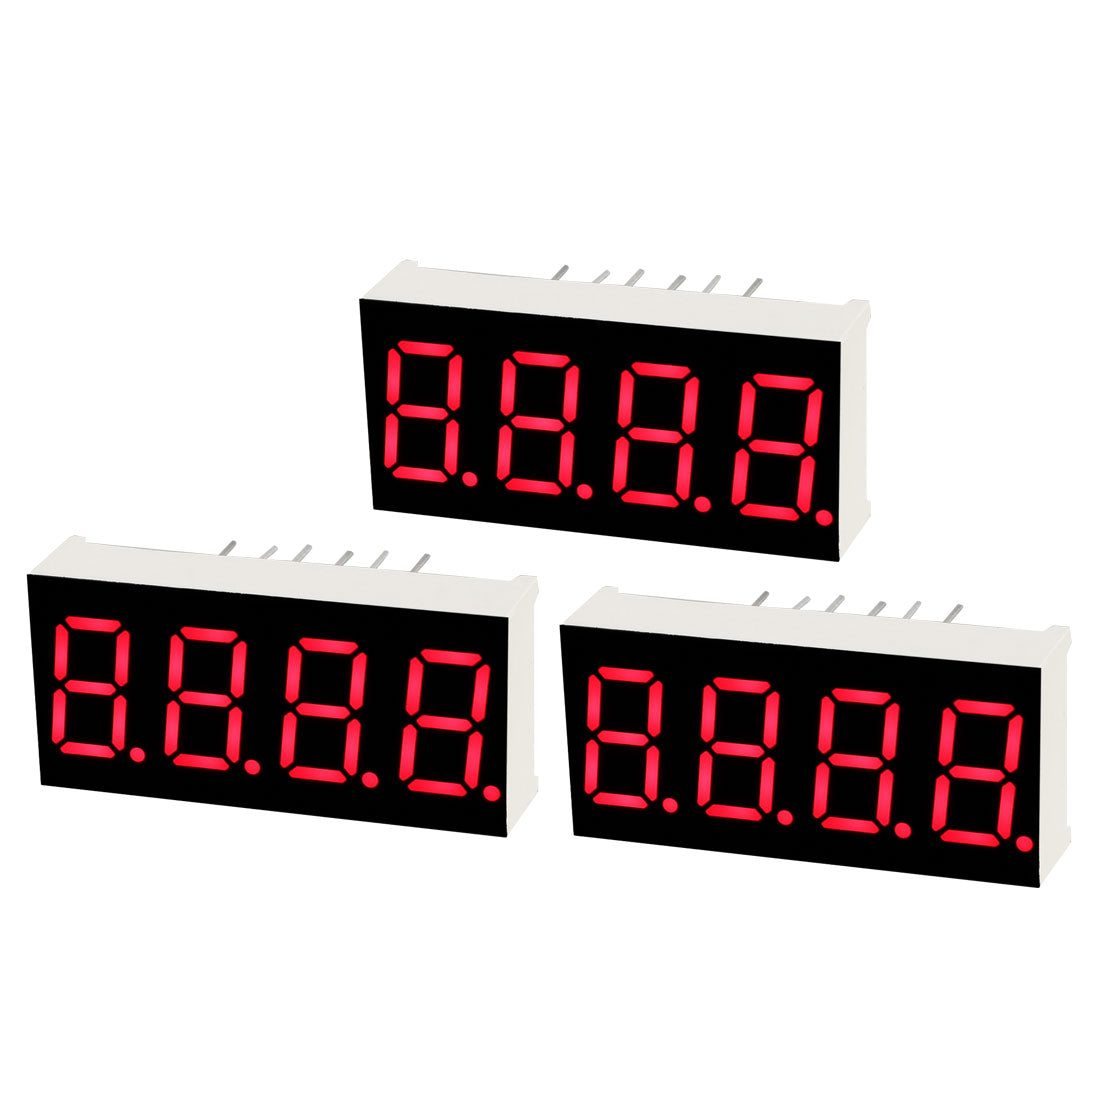 uxcell Uxcell Common Anode 12 Pin 4 Bit 7 Segment 1.18 x 0.55 x 0.28 Inch 0.35" Red LED Display Digital Tube 3pcs